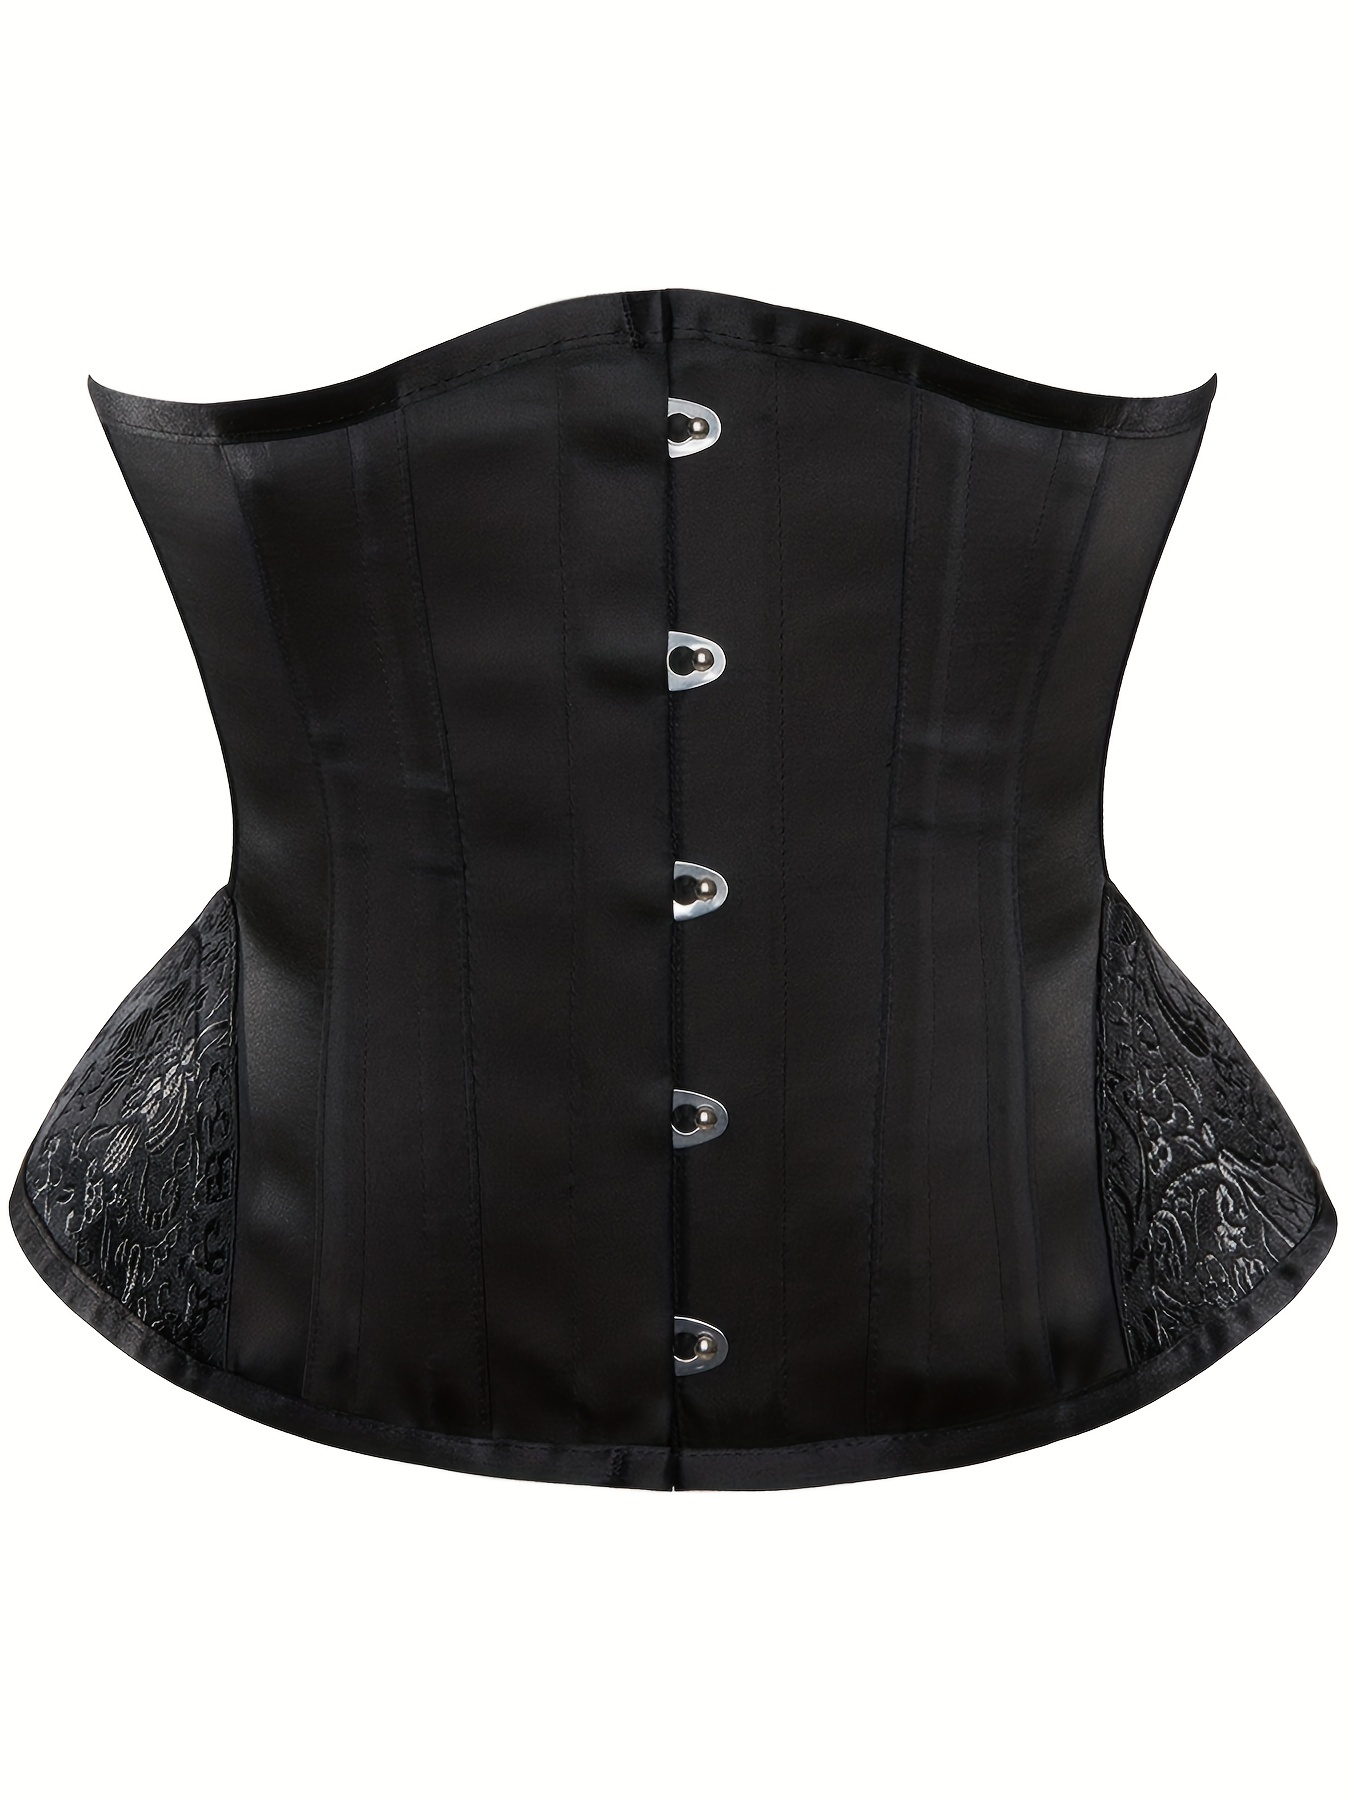 Lace Over Bust Corsets Black Women Lace Up Zipper Piping Waist Trainer -  Milanoo.com